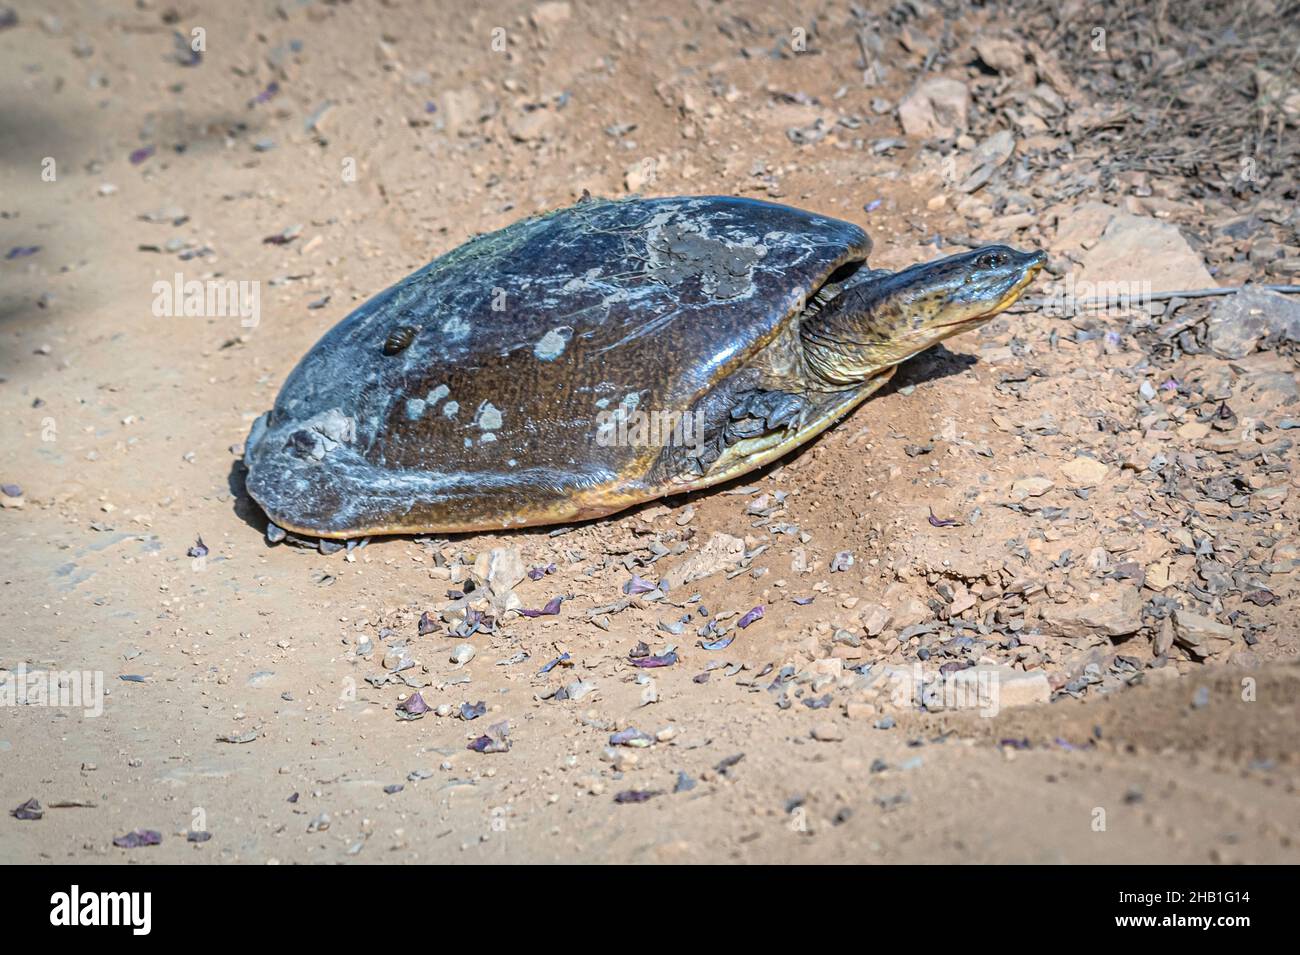 Indian turtle basking in the sun. Stock Photo